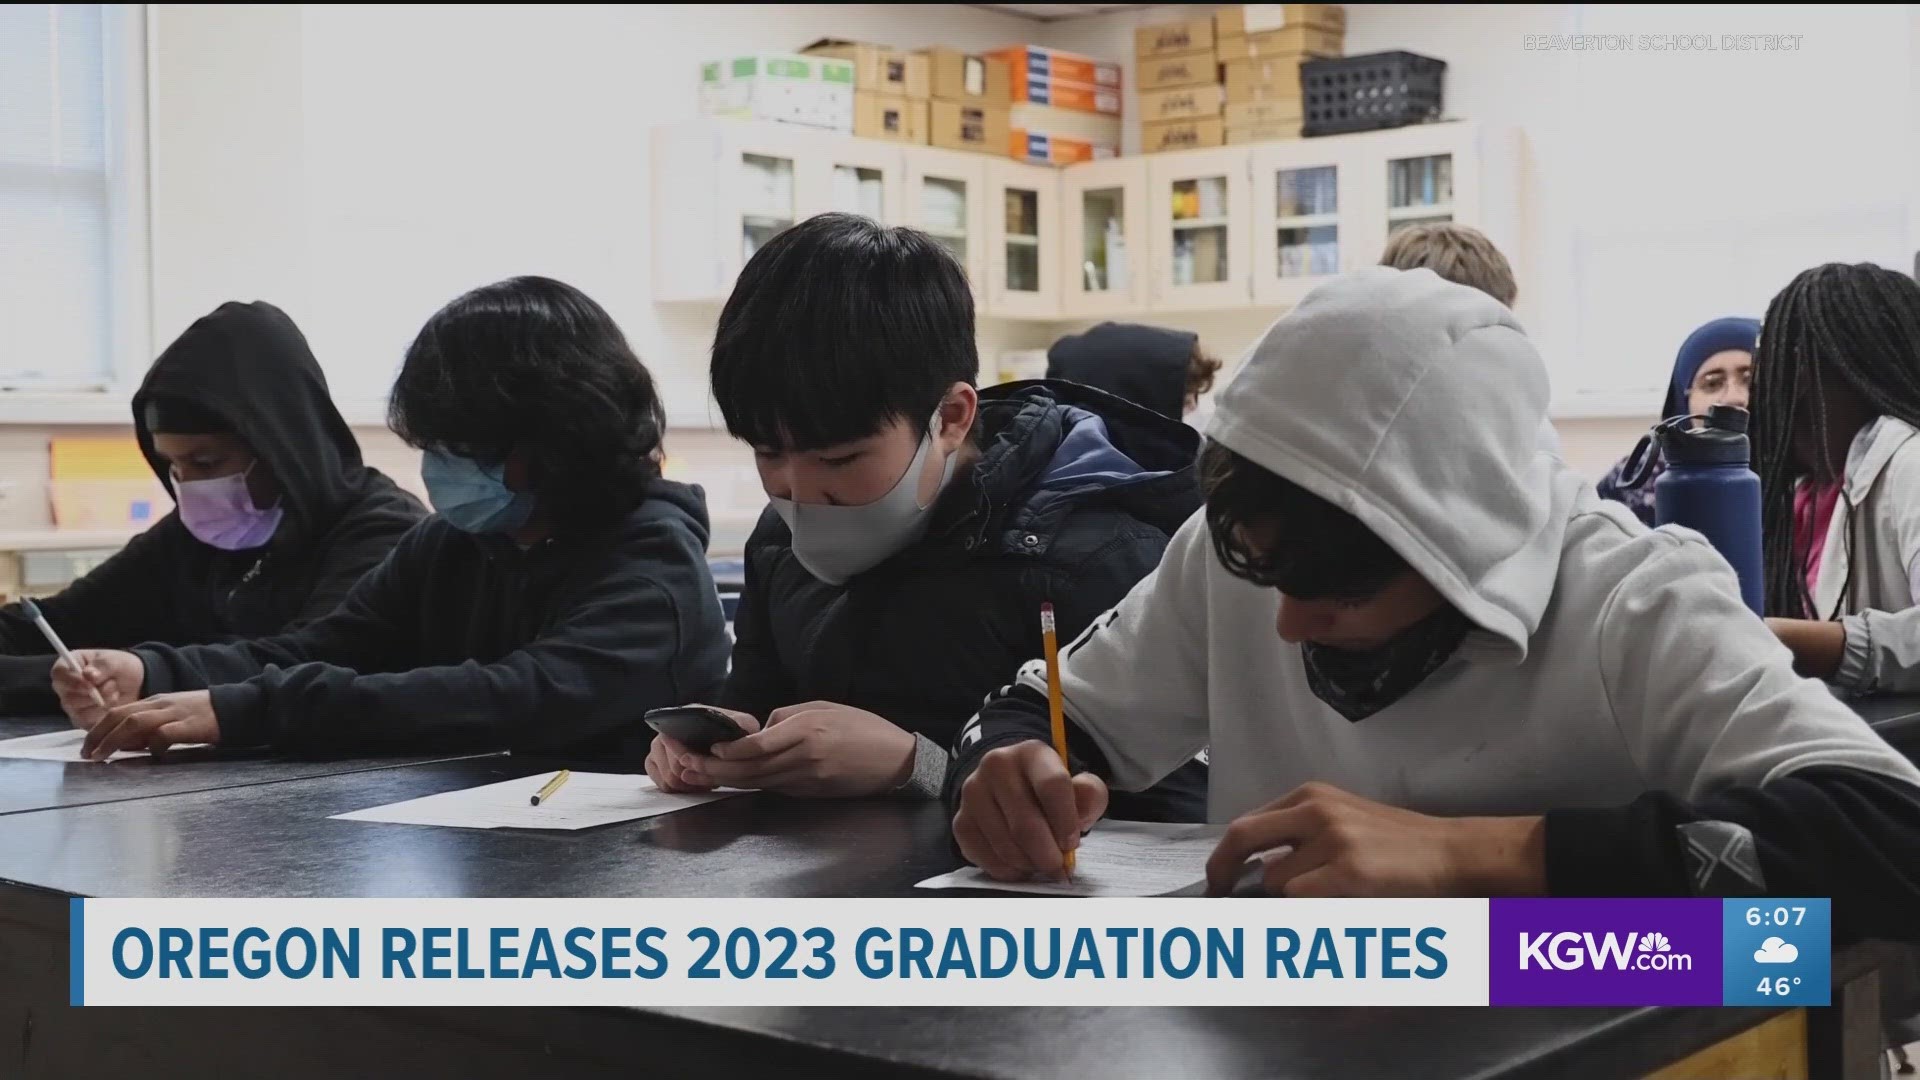 The Oregon Department of Education said that despite remote learning from the COVID-19 pandemic, graduation rates held steadily from last year.